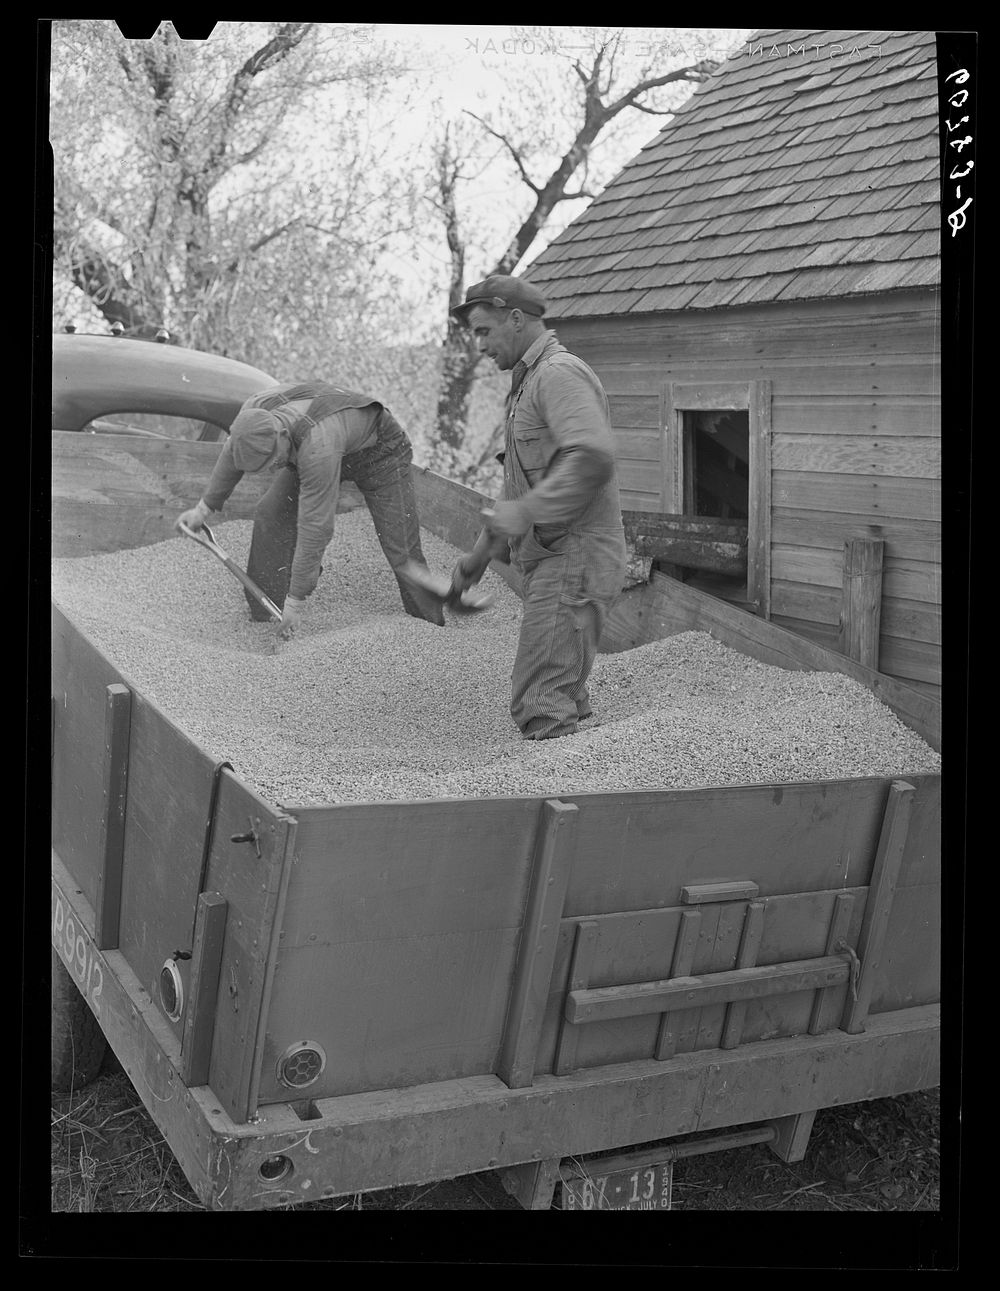 Loading shelled corn into storage bin. Monona County, Iowa. Sourced from the Library of Congress.